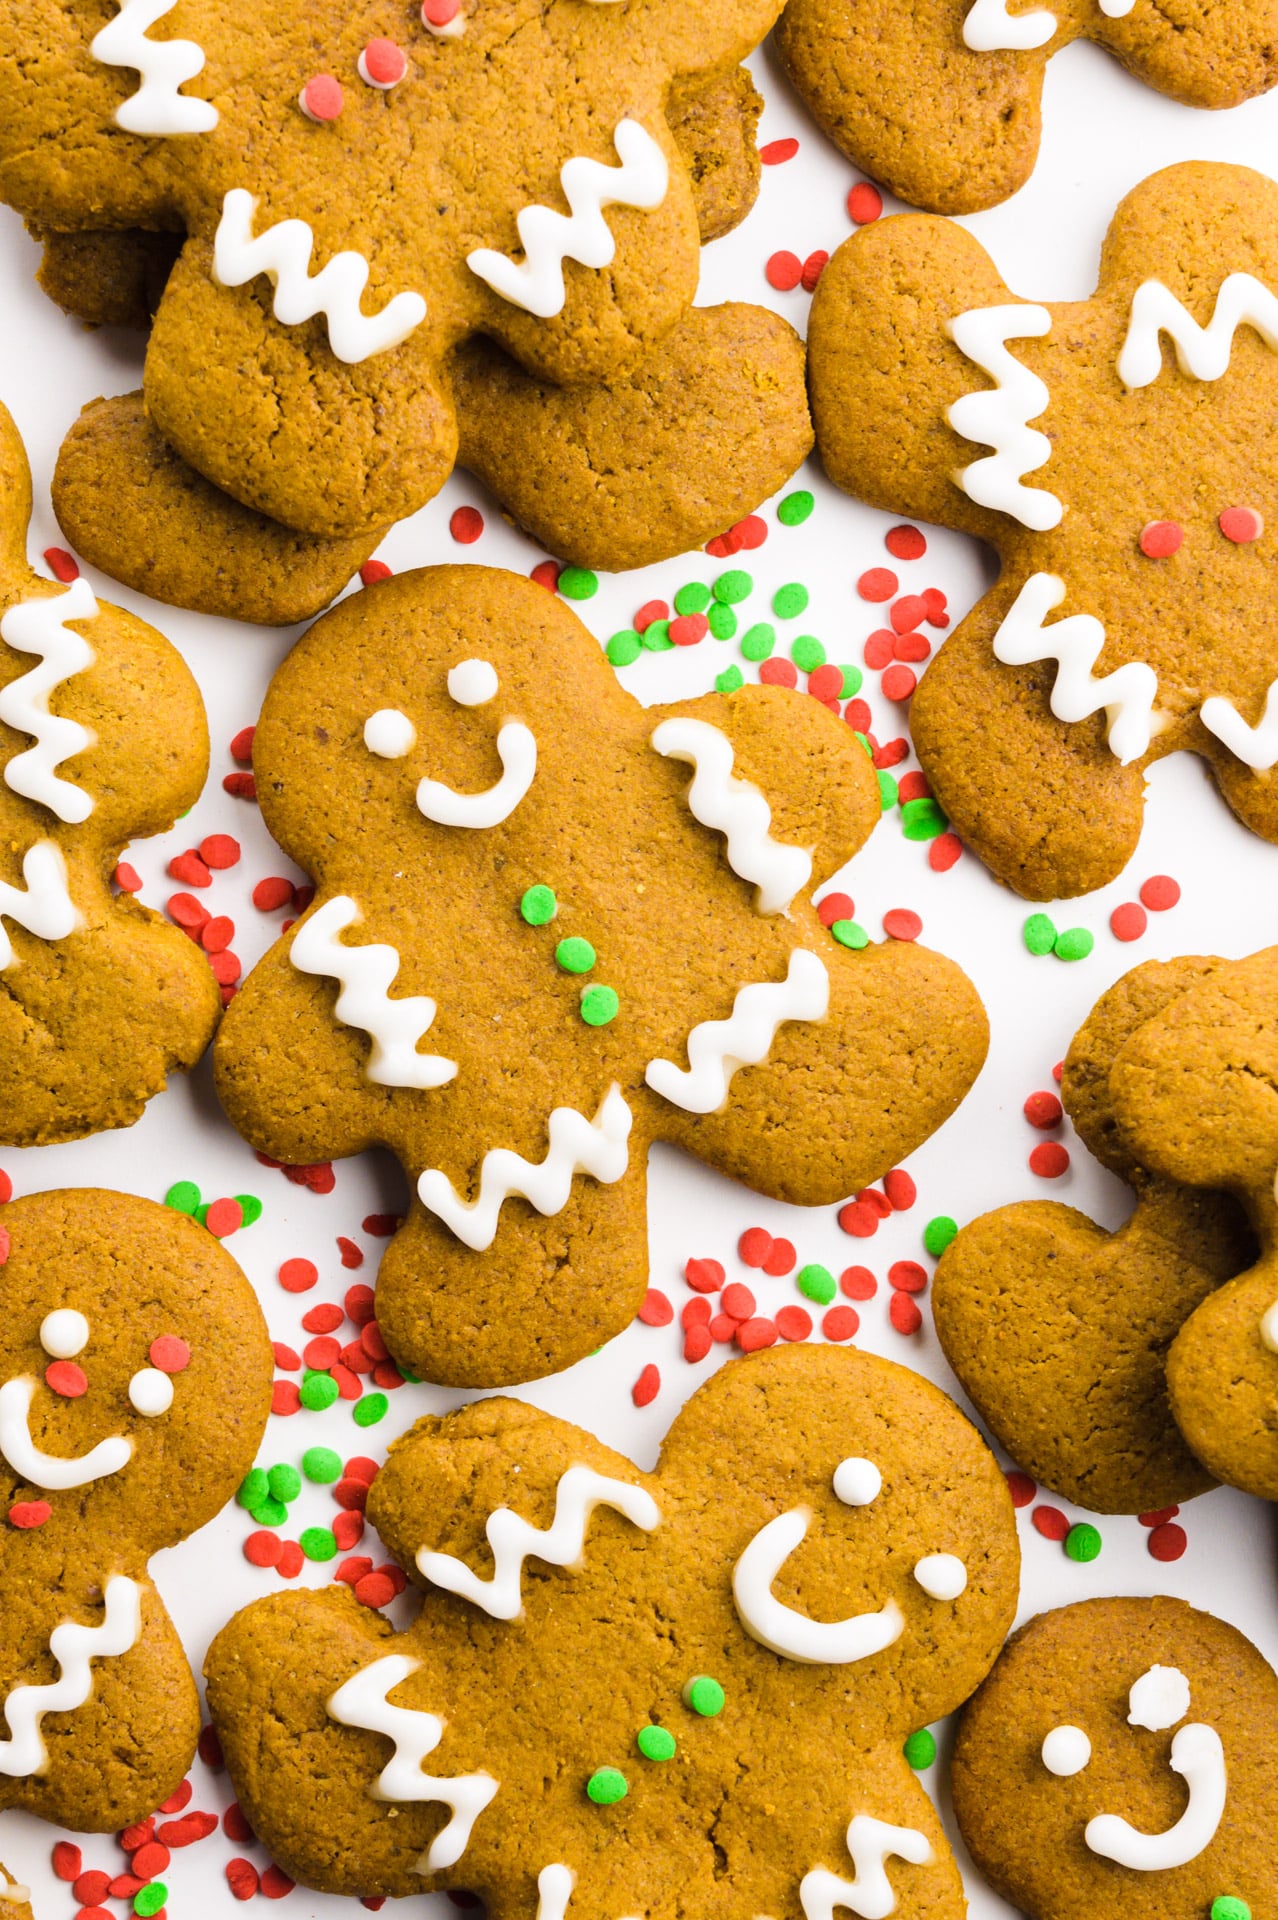 Several decorated gingerbread cookies are on a white countertop with sprinkles between them.